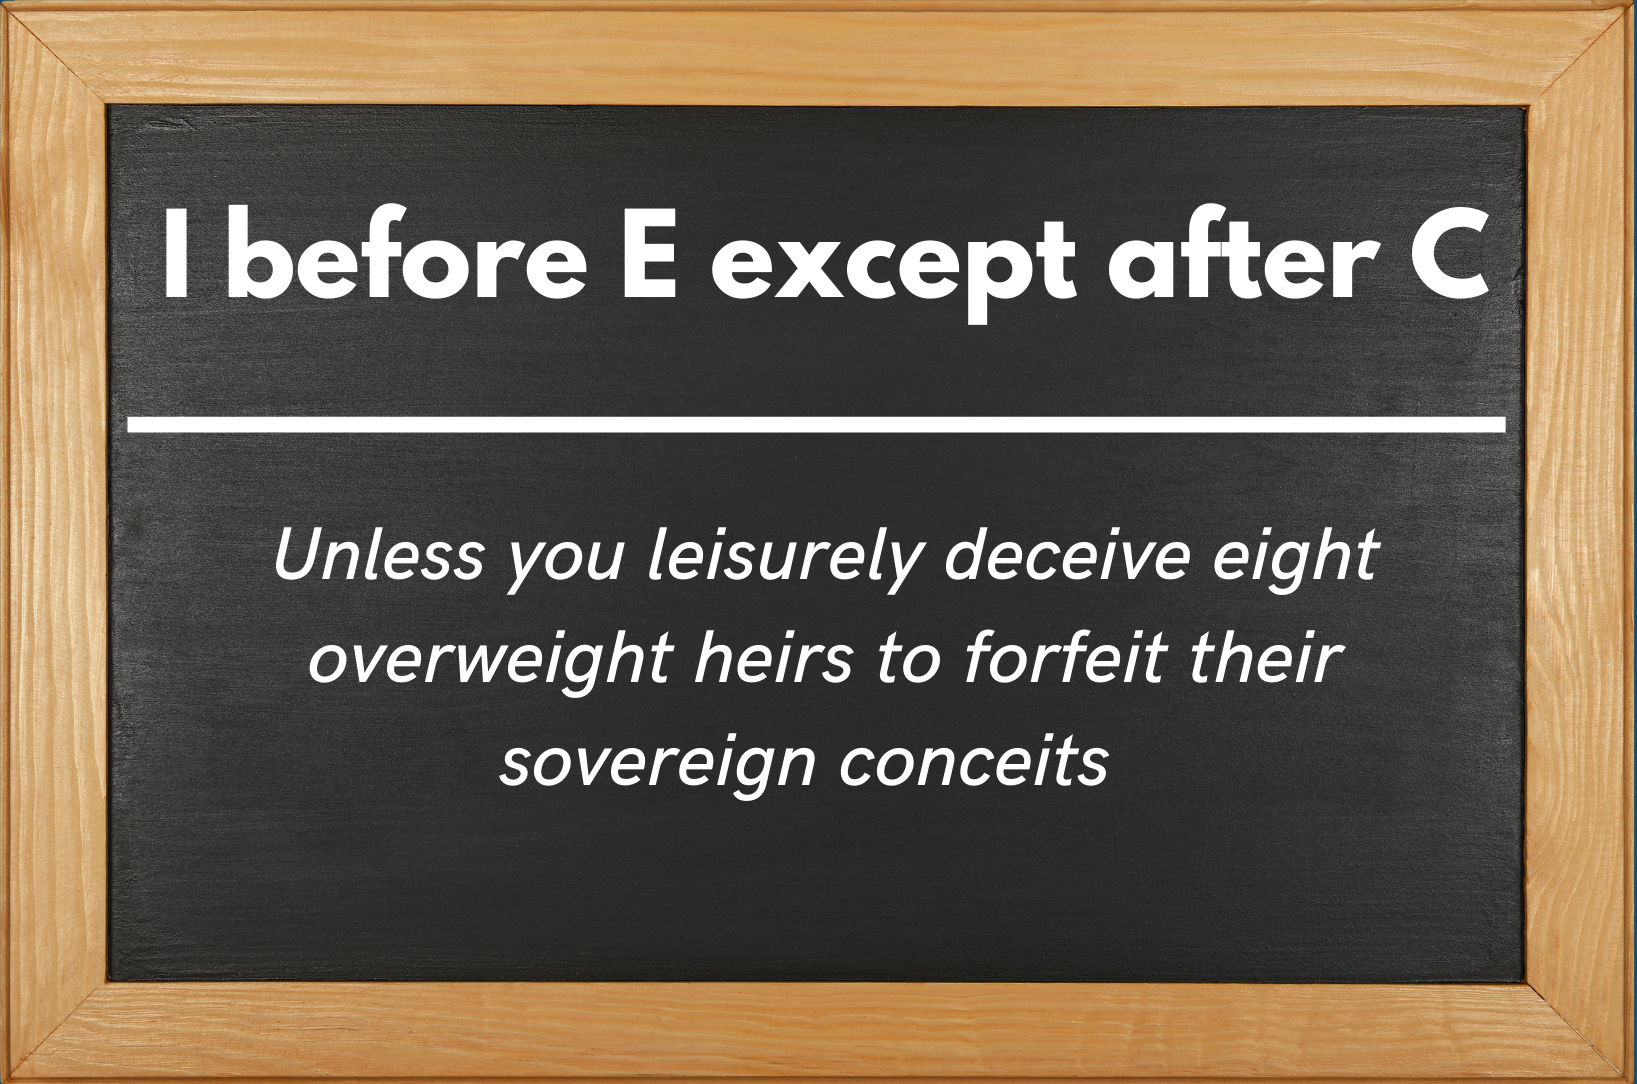 A chalk board showing the exception to the I before E except after C Rule using the phrase: "Unless you leisurely deceive eight overweight heirs to forfeit their sovereign conceits"